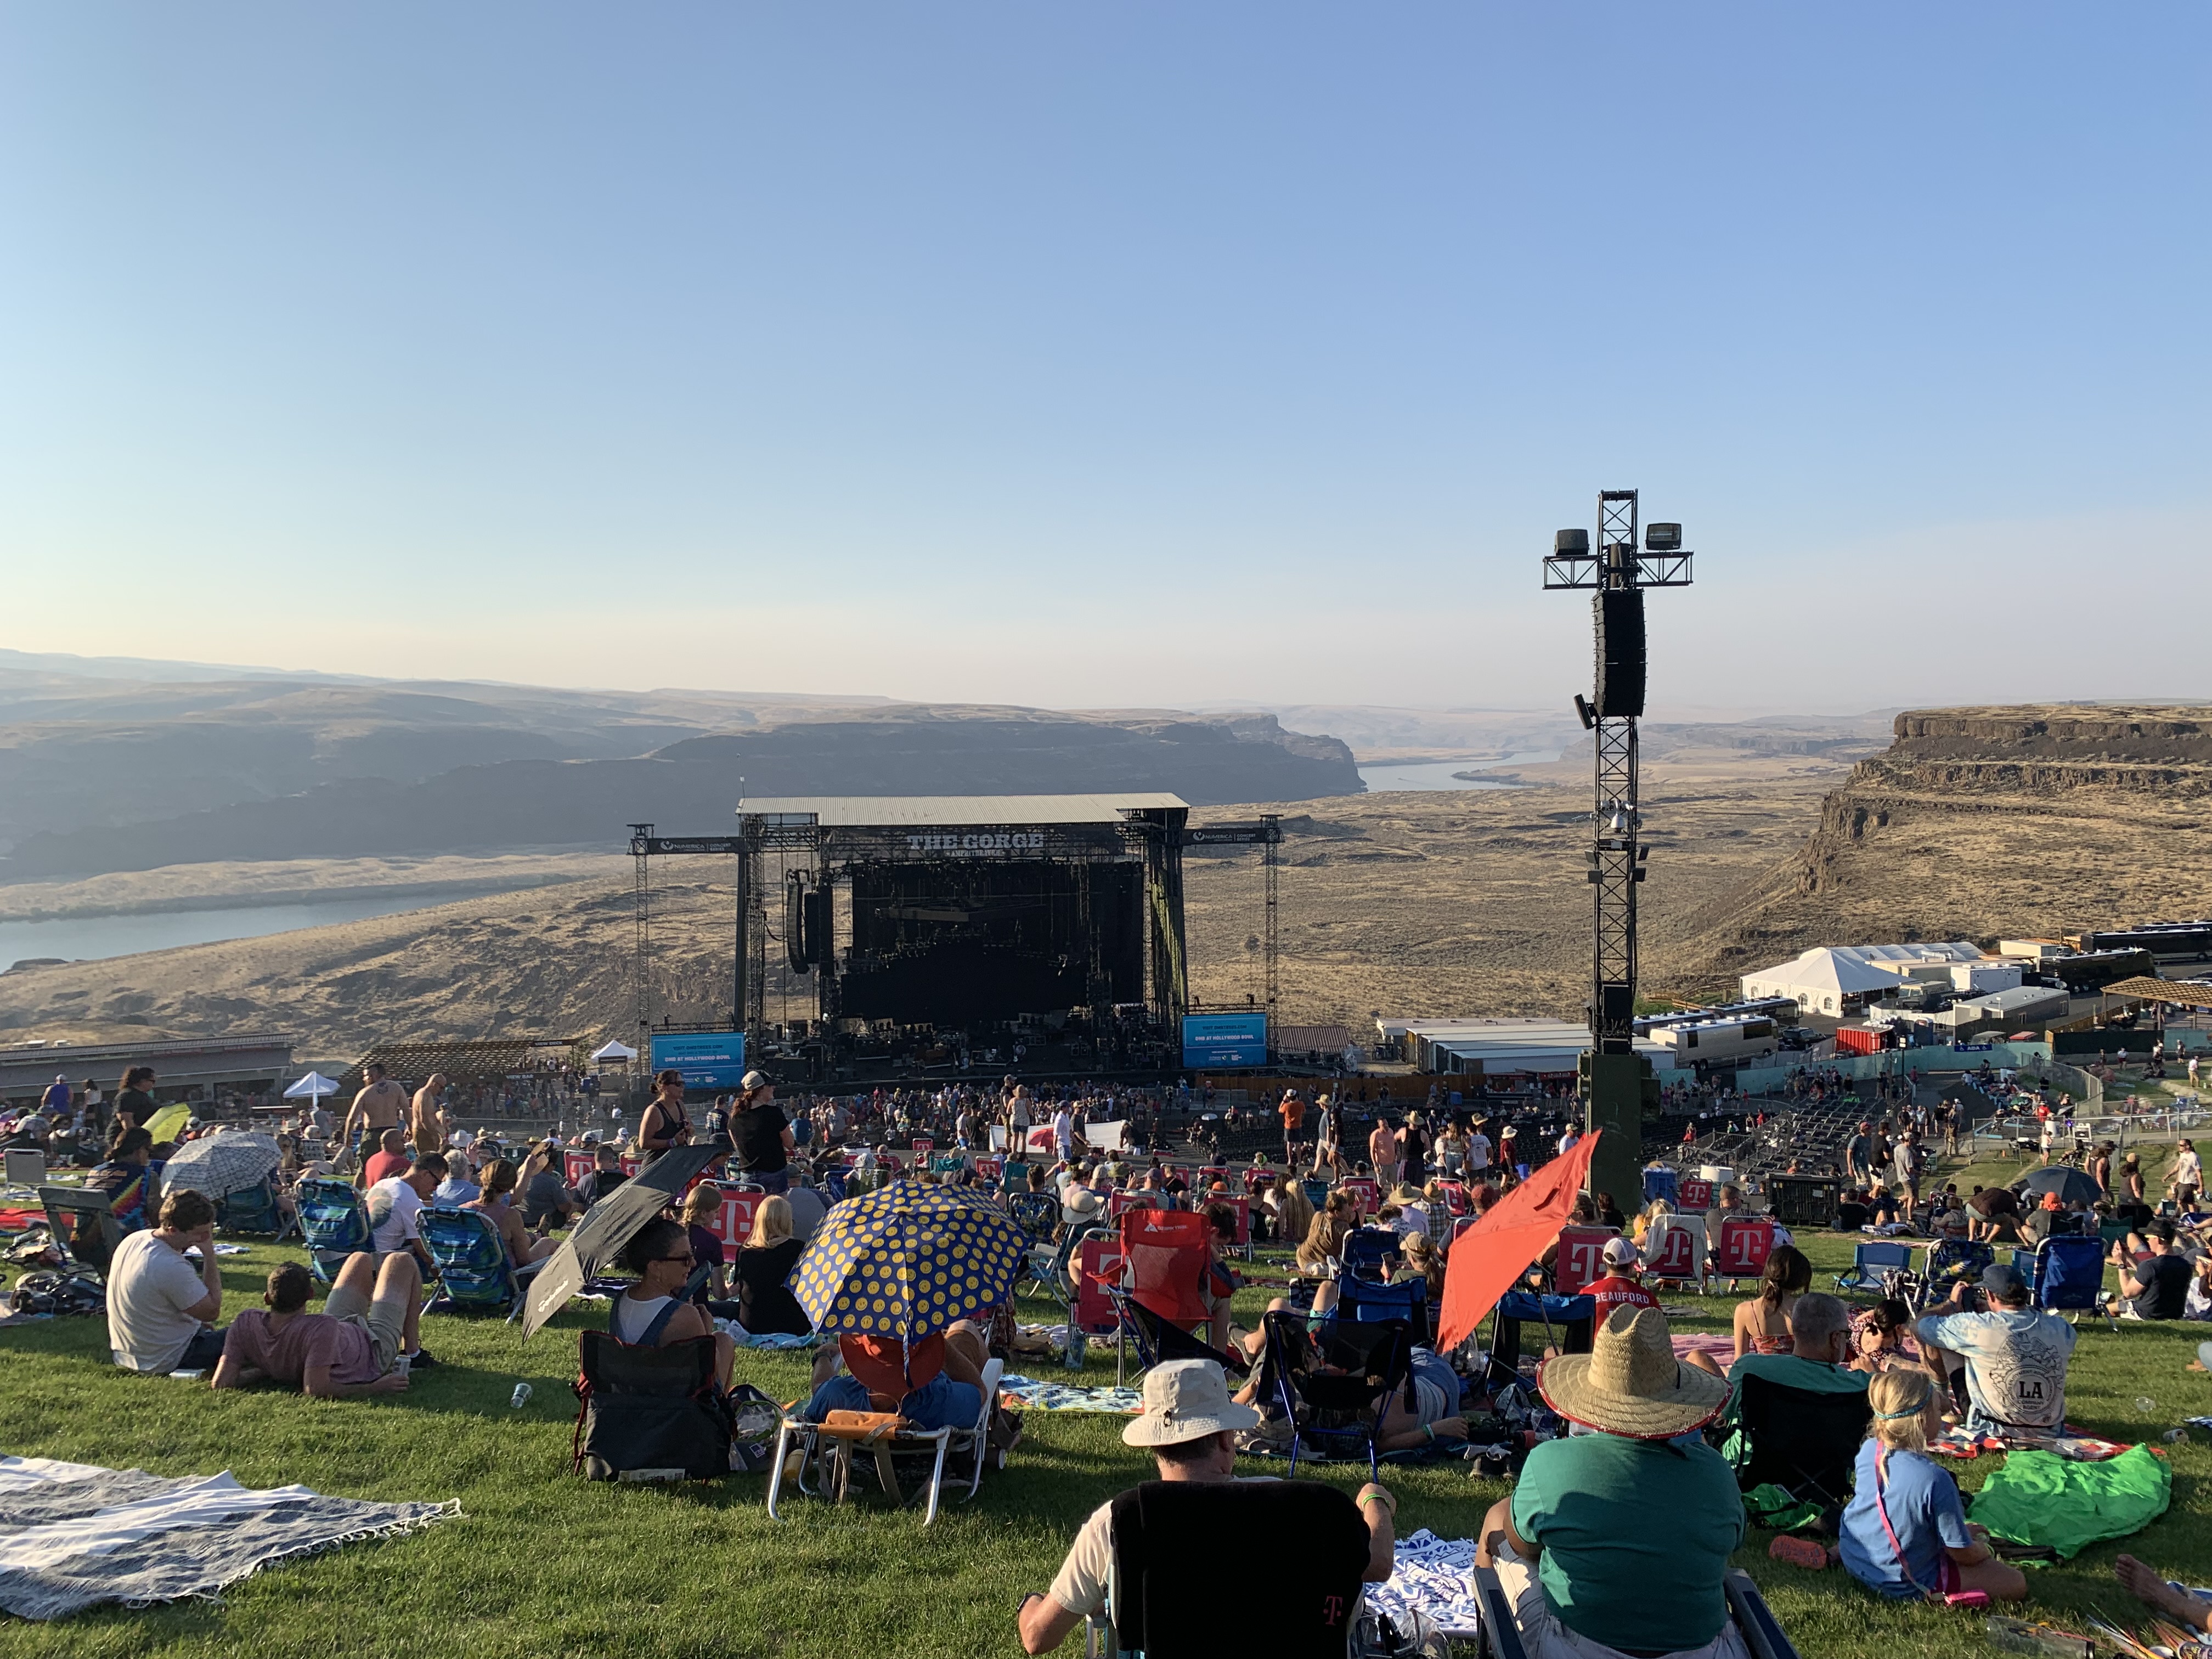 Is the Gorge safe? Trouble and violence mar popular concert venue and campsite